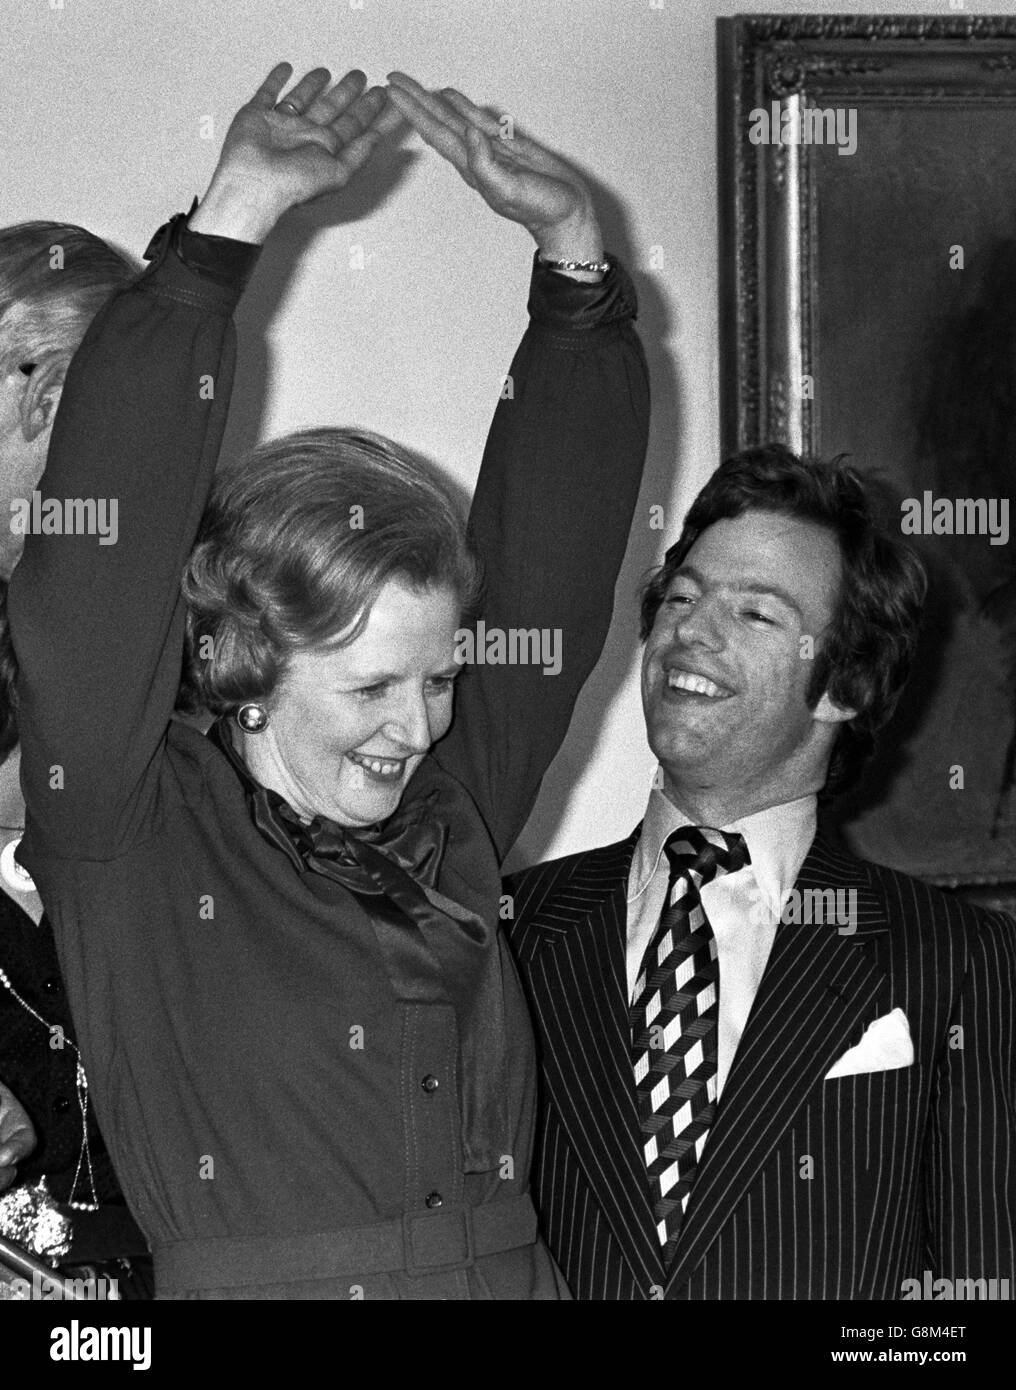 Mark Thatcher stands alongside his famous mother, Margaret, the Conservative leader, who told newsmen. 'I'm still not absolutely certain. We were cautiously optimistic, now we are optimistic. Stock Photo